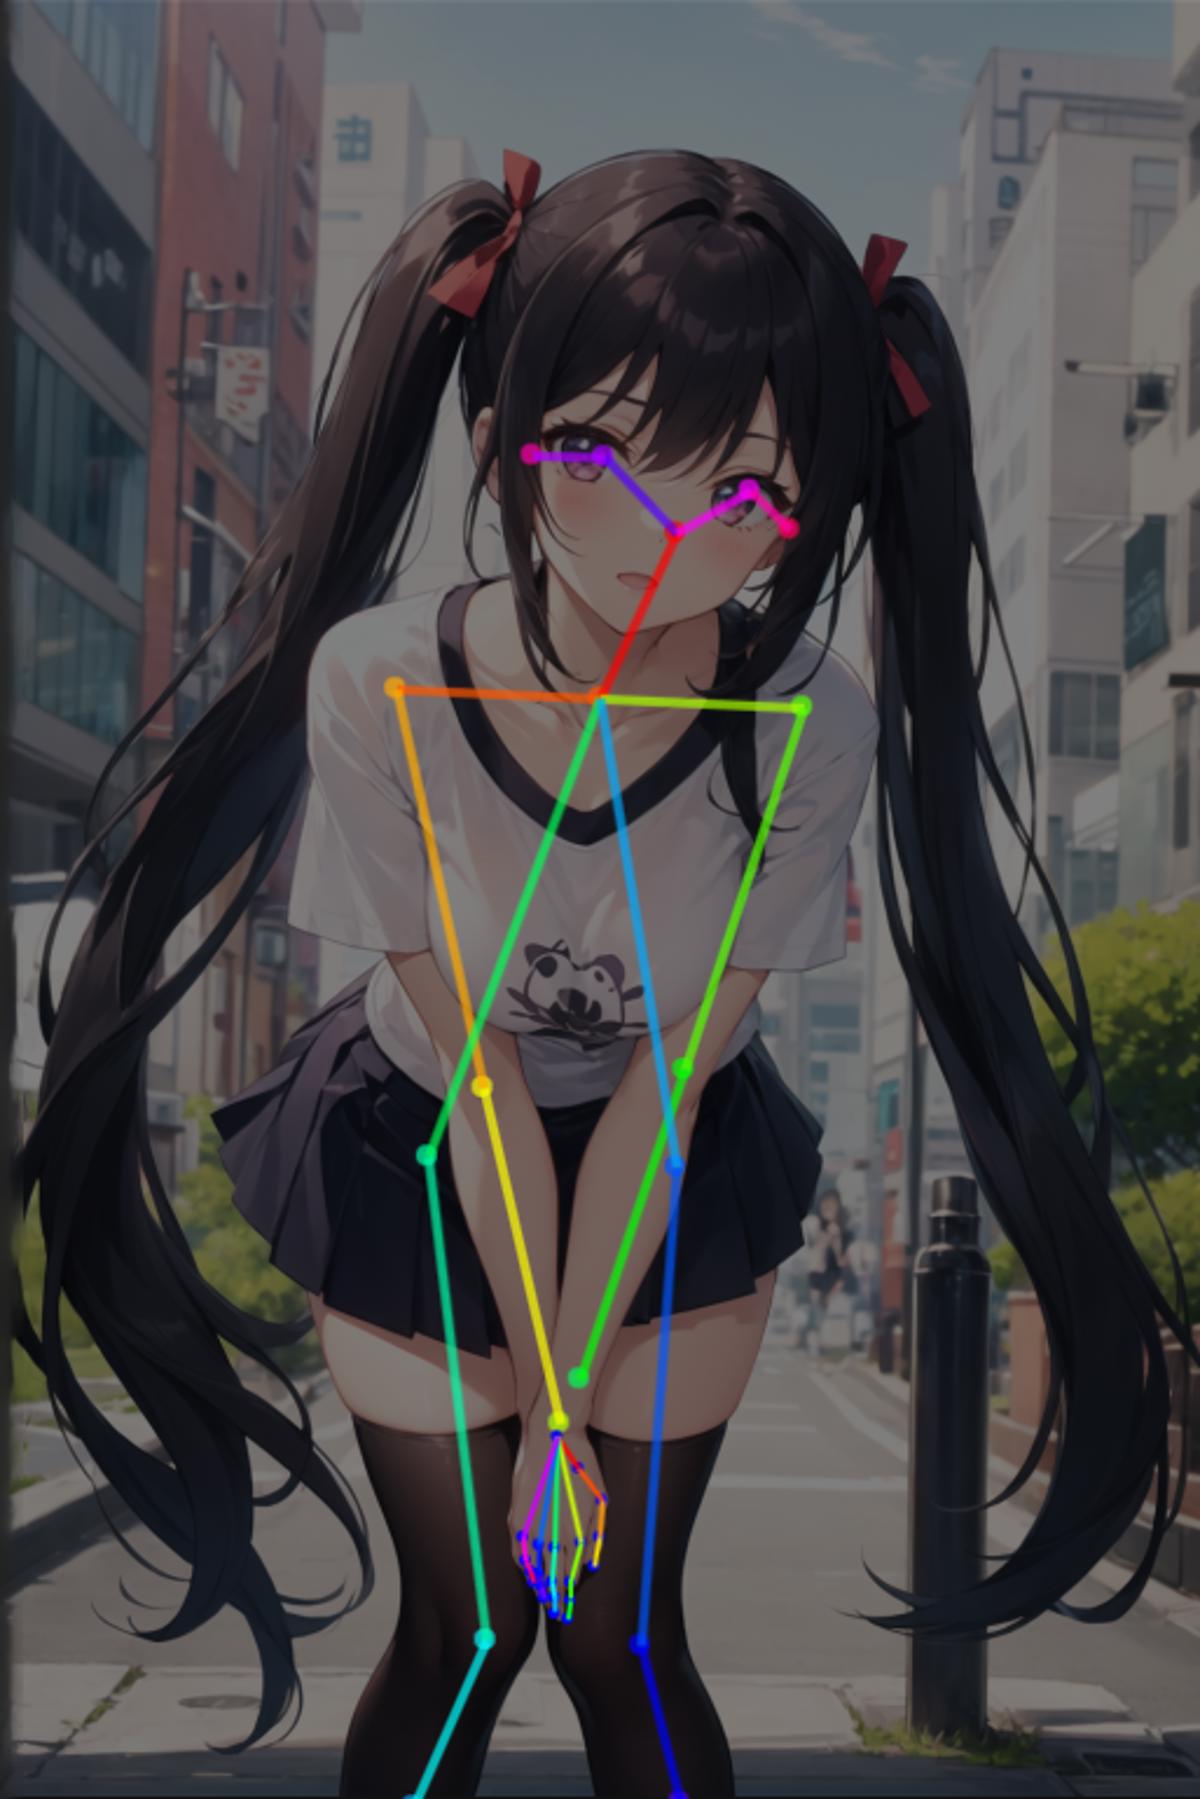 362 Anime Poses by controlnetposes.com - v1.0, Stable Diffusion Poses